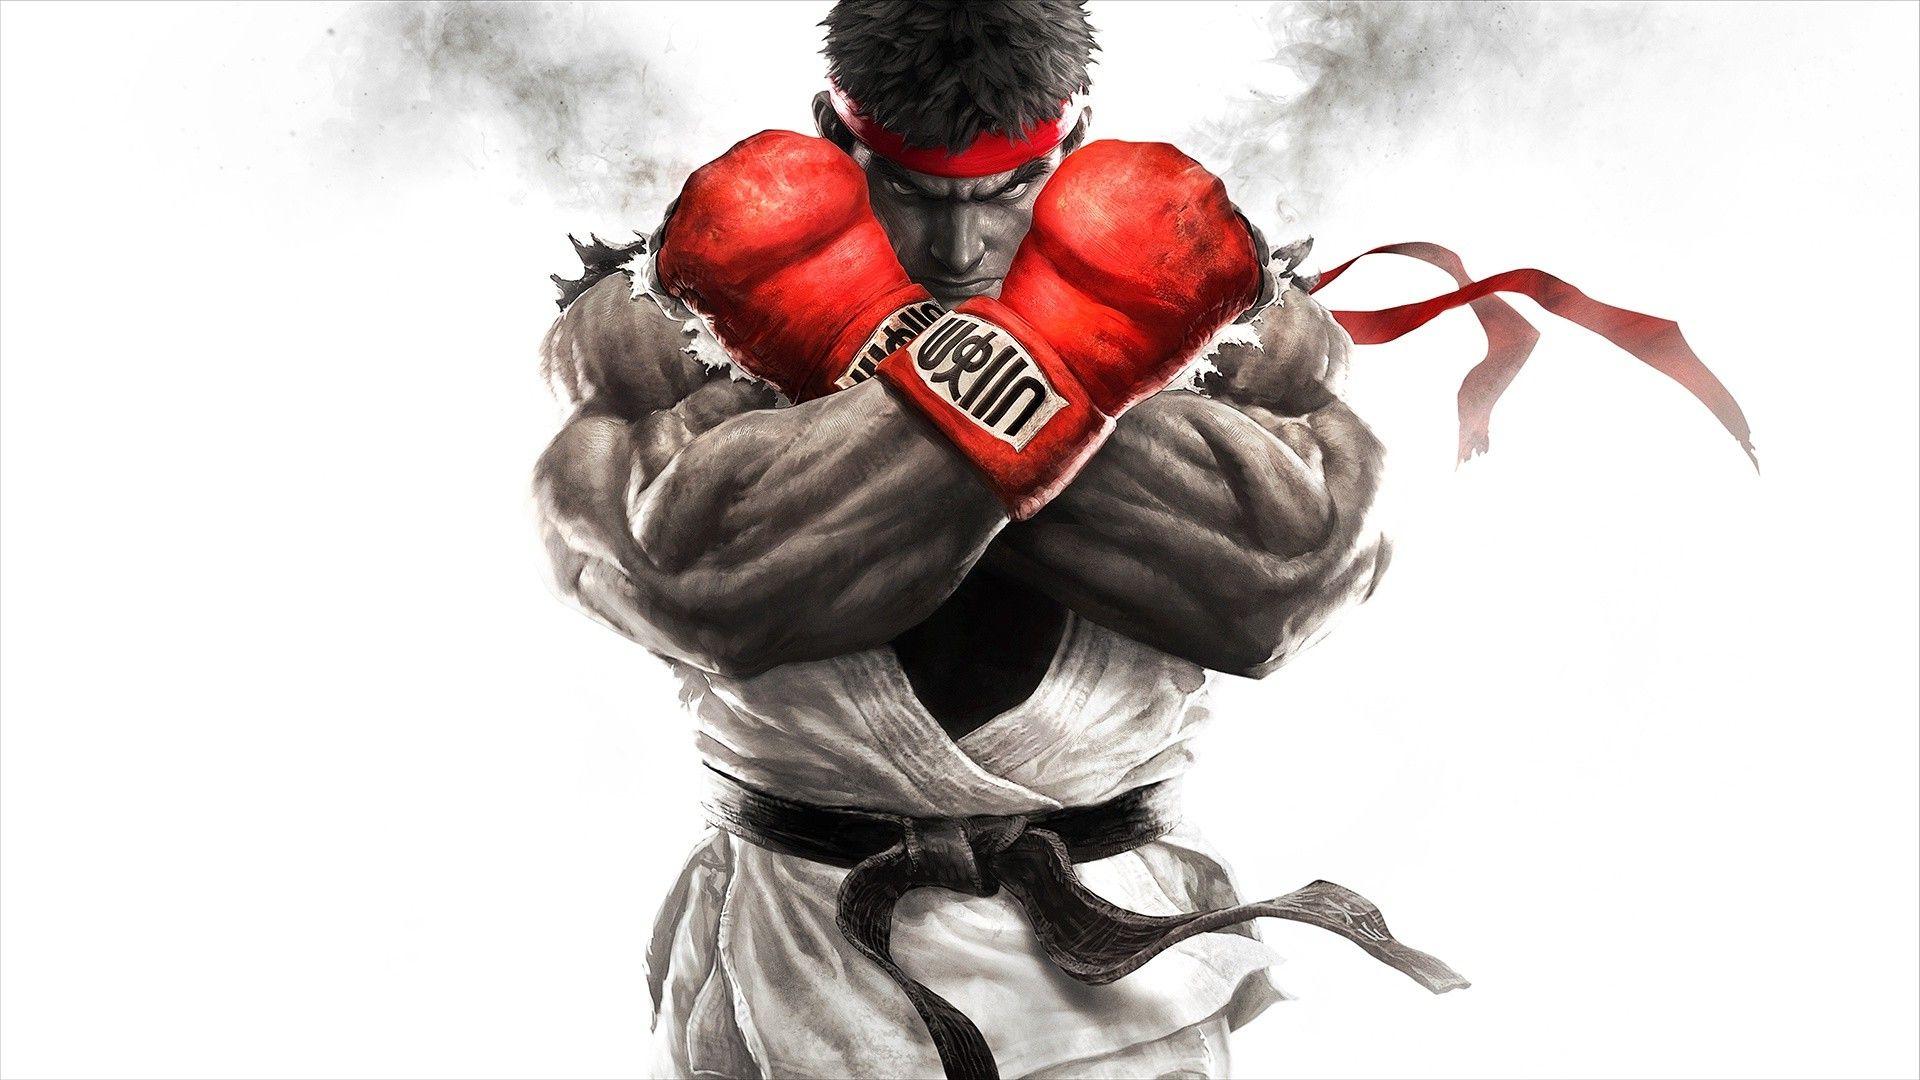 backgrounds 1080p street fighter wallpaper cave backgrounds 1080p street fighter